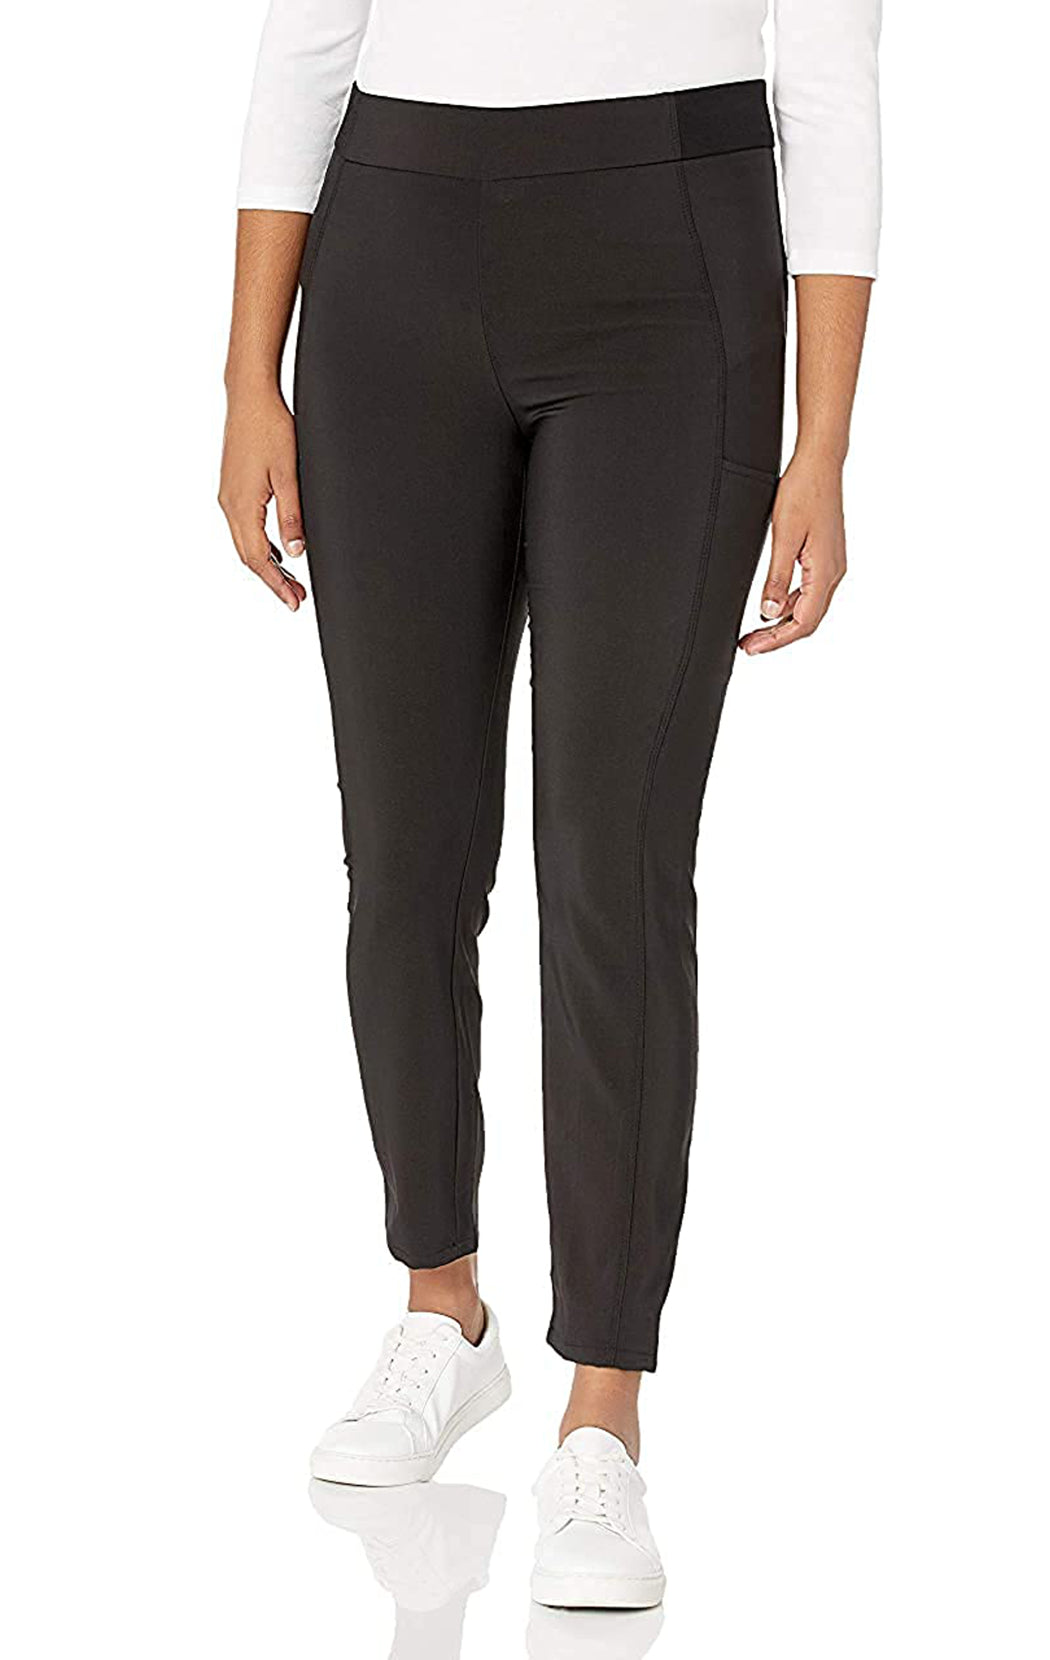 Briggs Womens Pull-On Side Pocket Pant